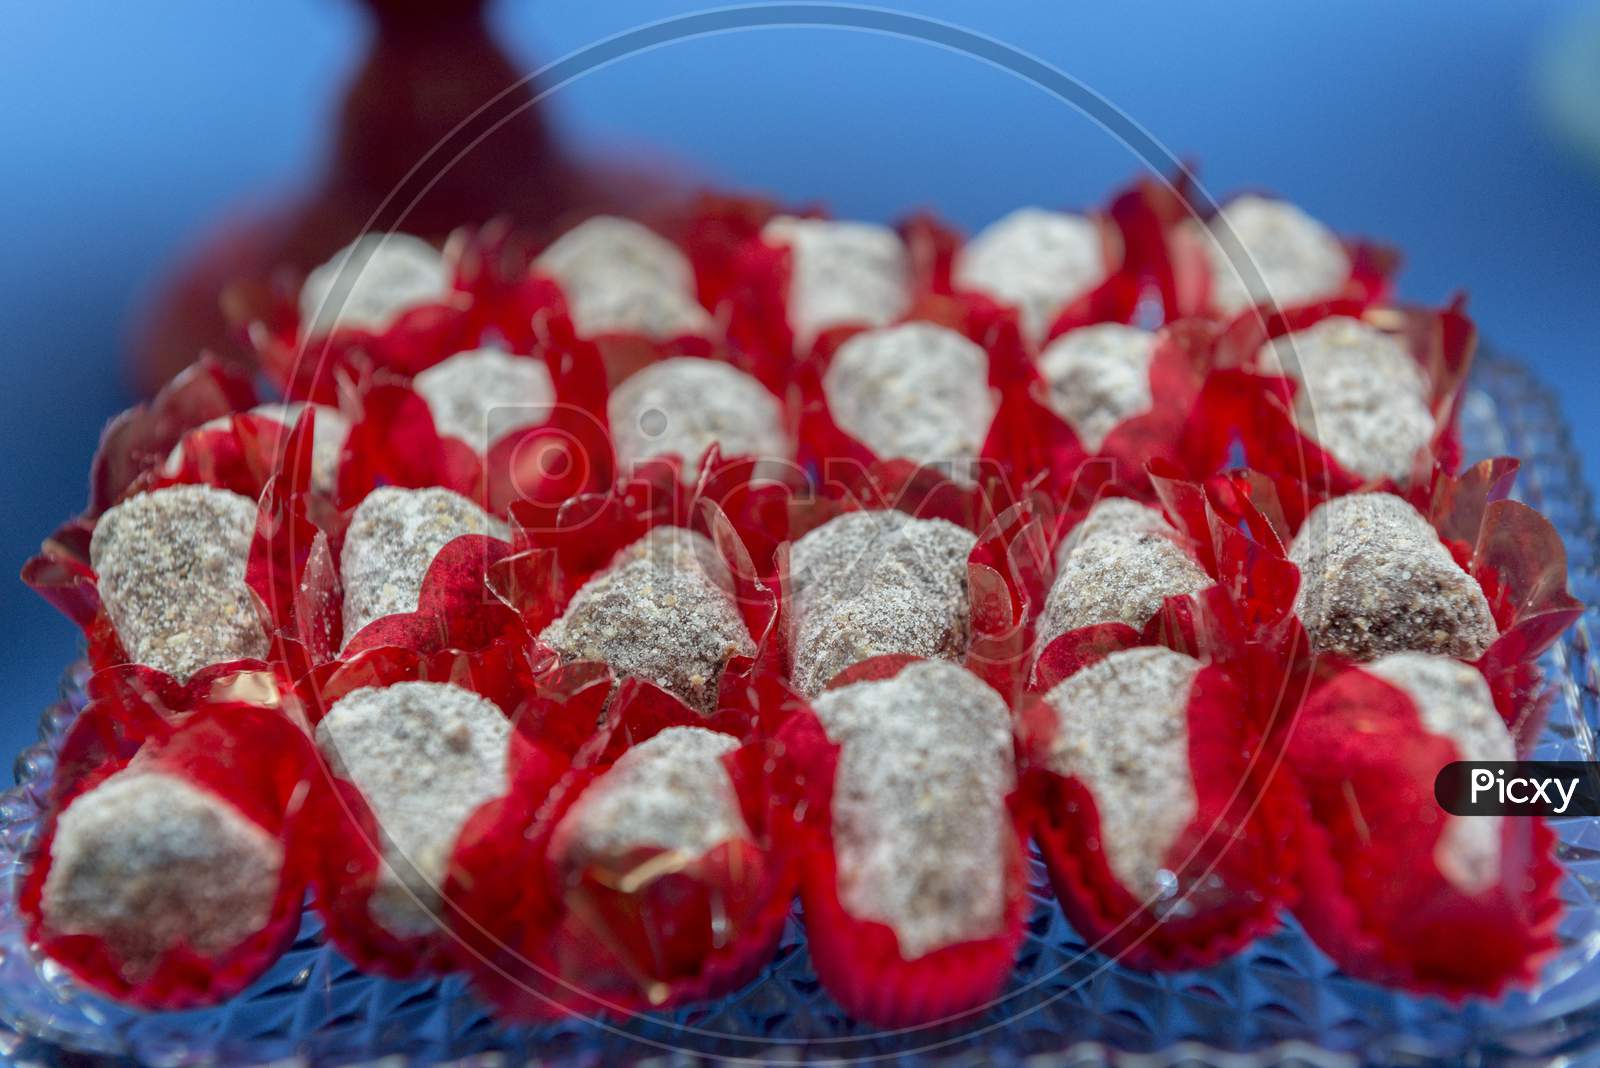 Close Up Of Delicious Candies At Party Reception.